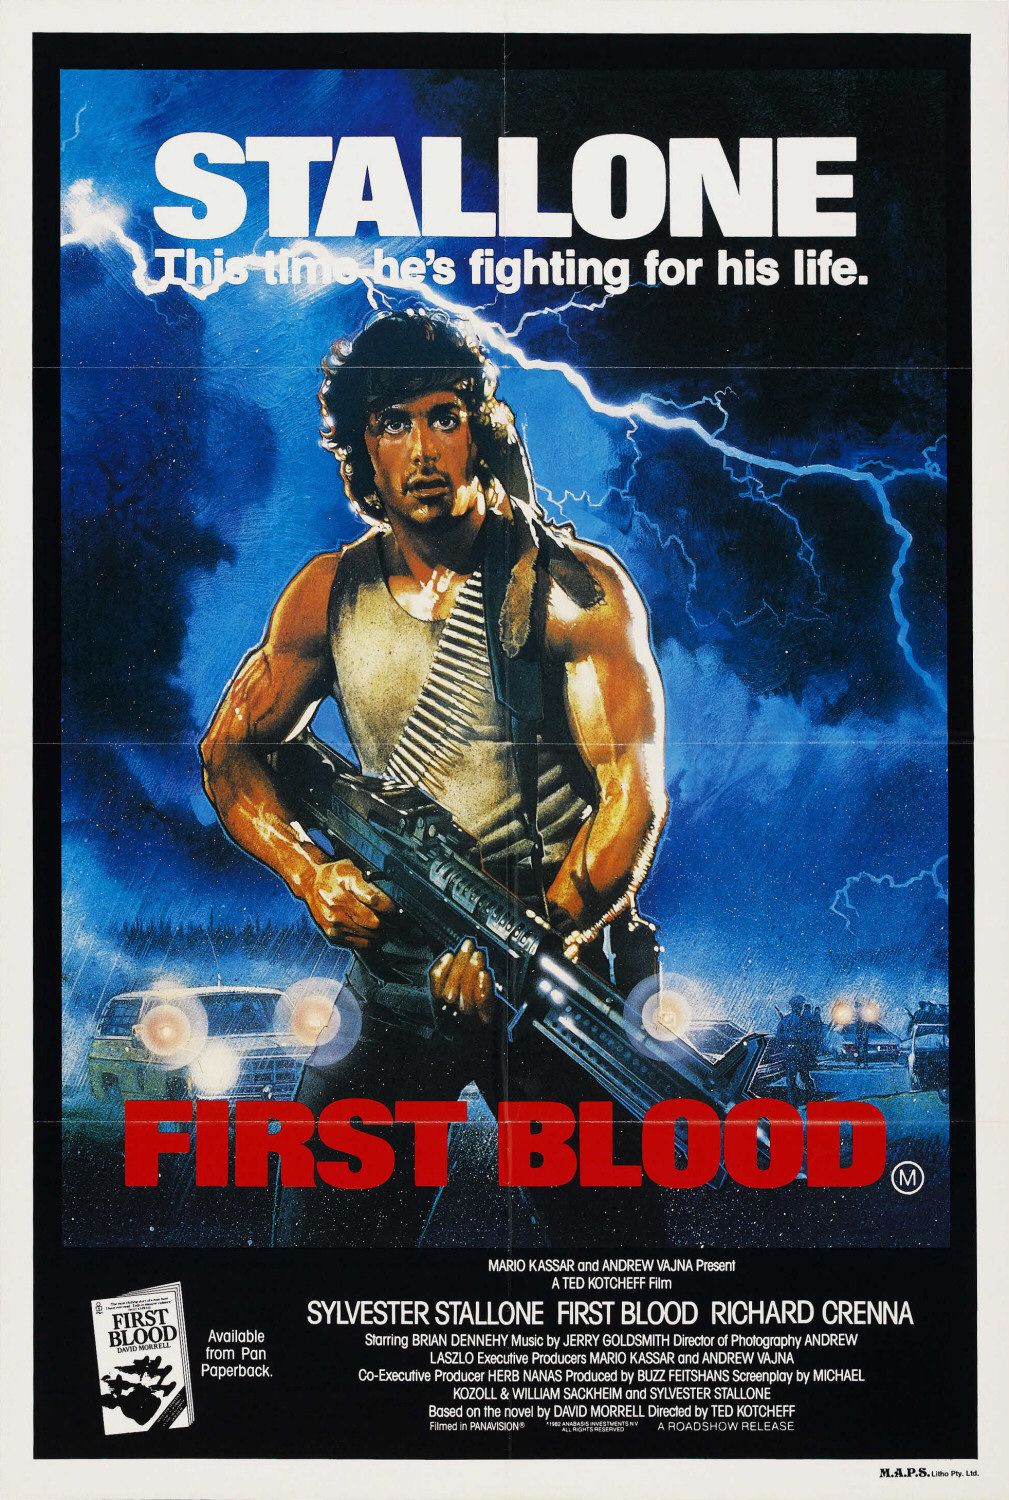 first blood movie poster - Stallone his time he's fighting for his life. arrel lopulla loro Firstblueto Mario Kassar and Andrew Vajna Present A Ted Kotcheff Film Sylvester Stallone First Blood Richard Crenna First Blood David Morrell Available from Pan Pa